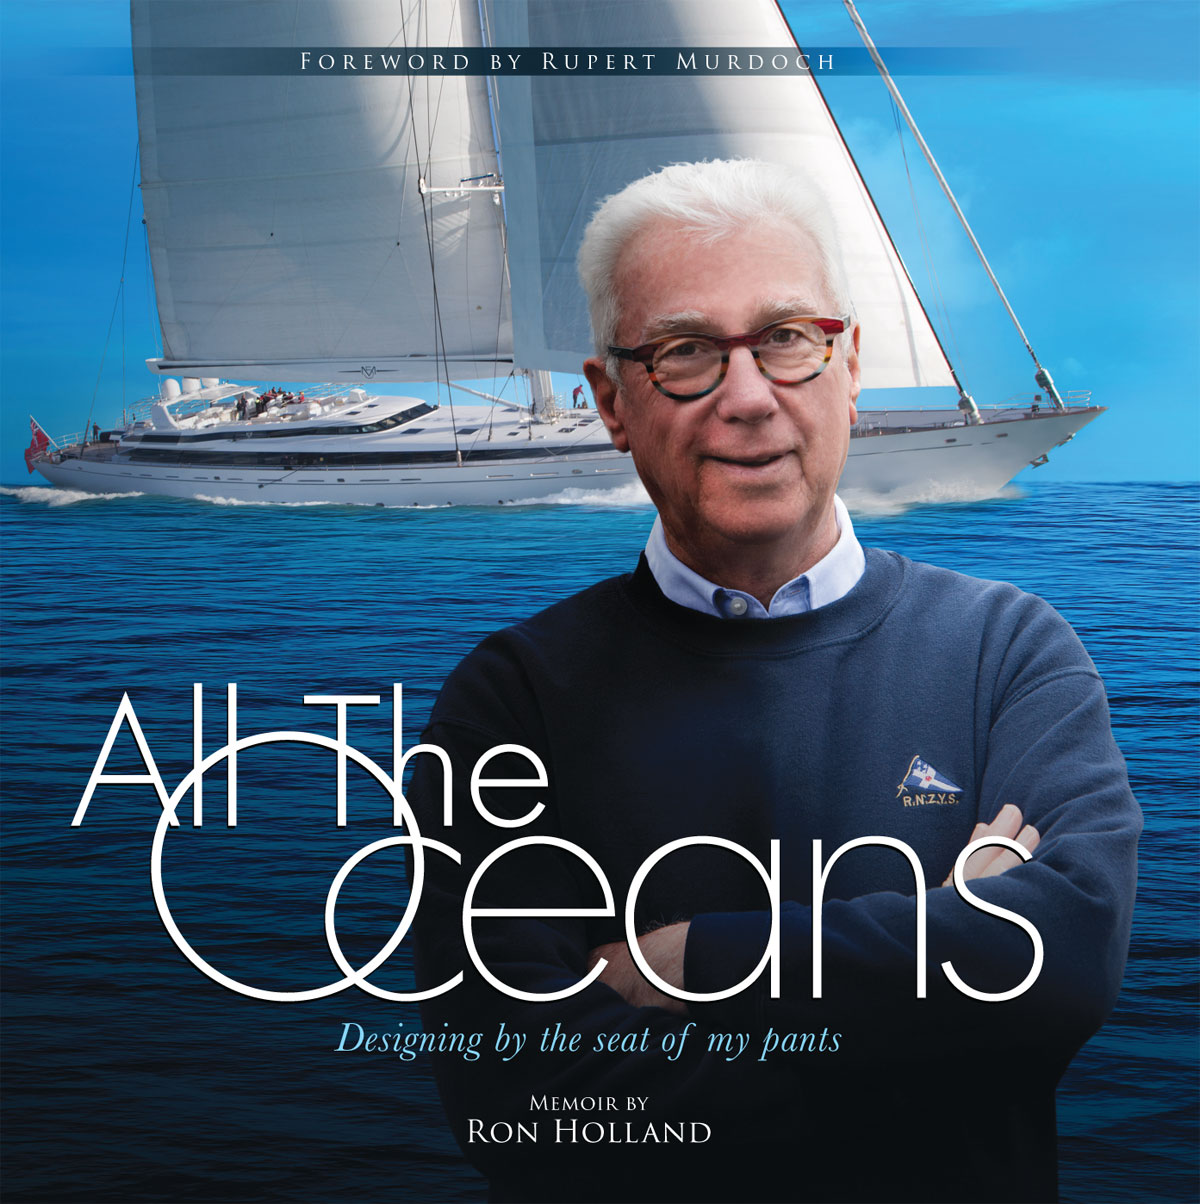 Book jacket artwork for front cover Ron Holland's memoir, All The Oceans